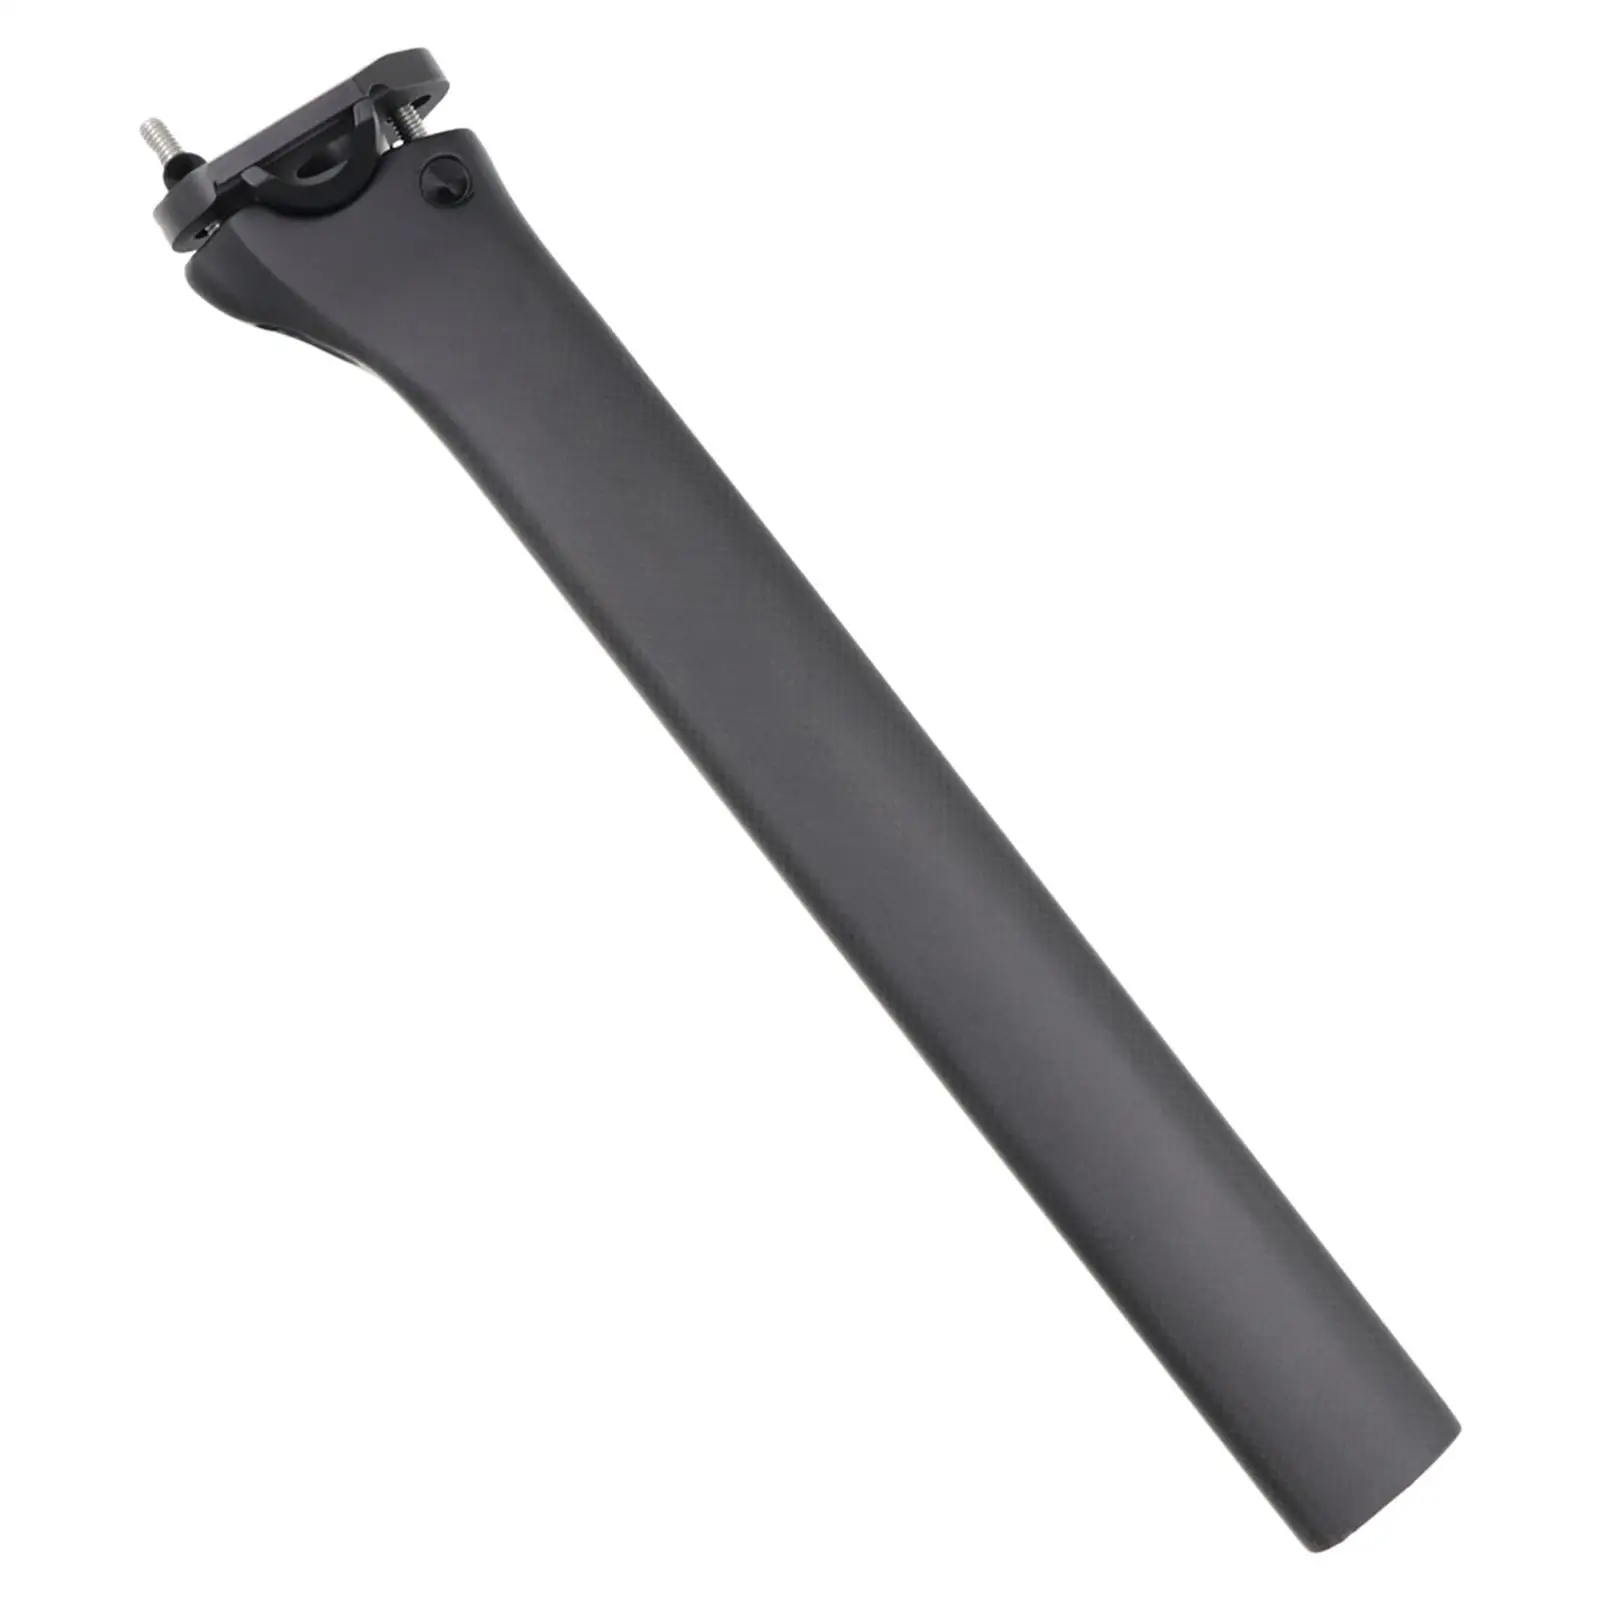 Carbon Fiber Road Bike Seat Post Ultralight Seat Tube 340mm Bicycle Seatpost for F8/F10/F12 Bikes Saddle Post Replacement